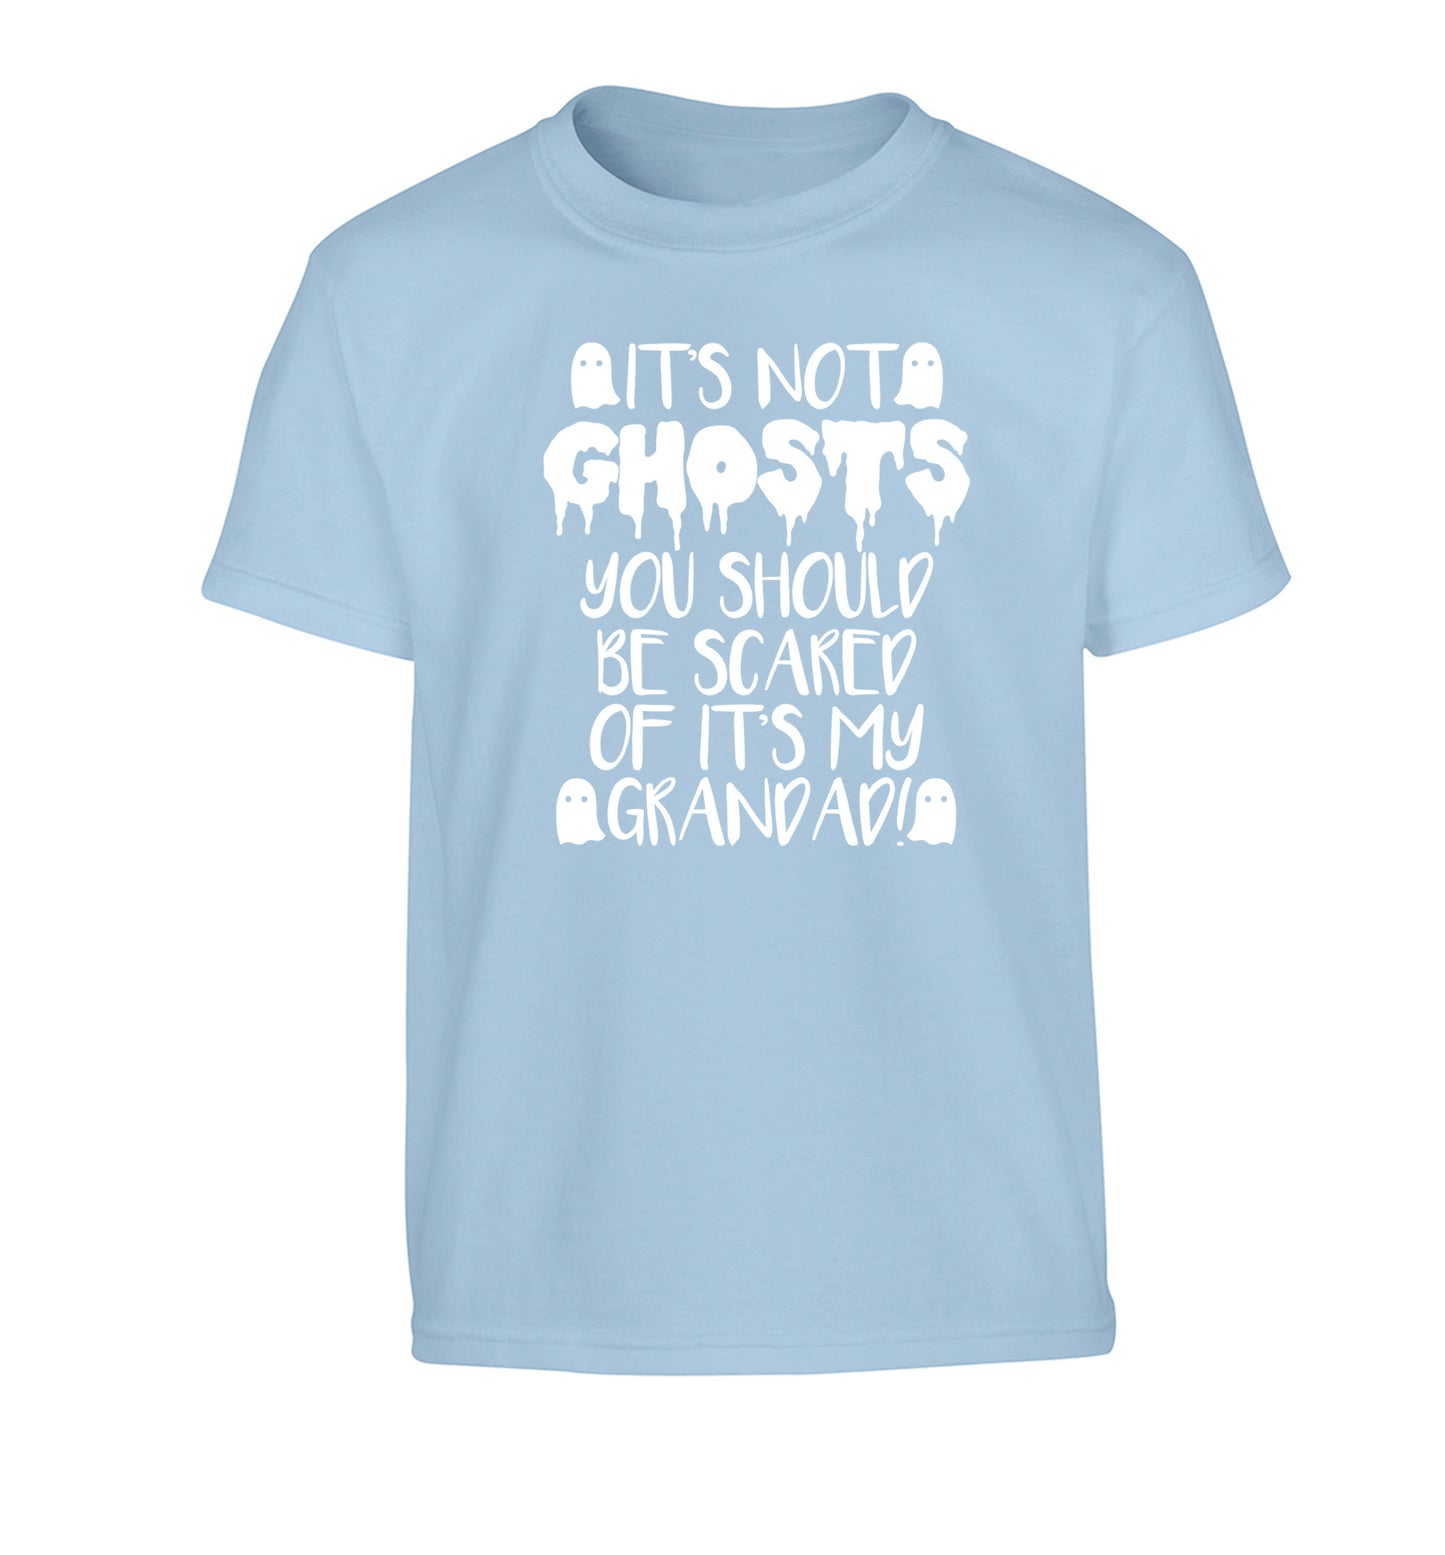 It's not ghosts you should be scared of it's my grandad! Children's light blue Tshirt 12-14 Years